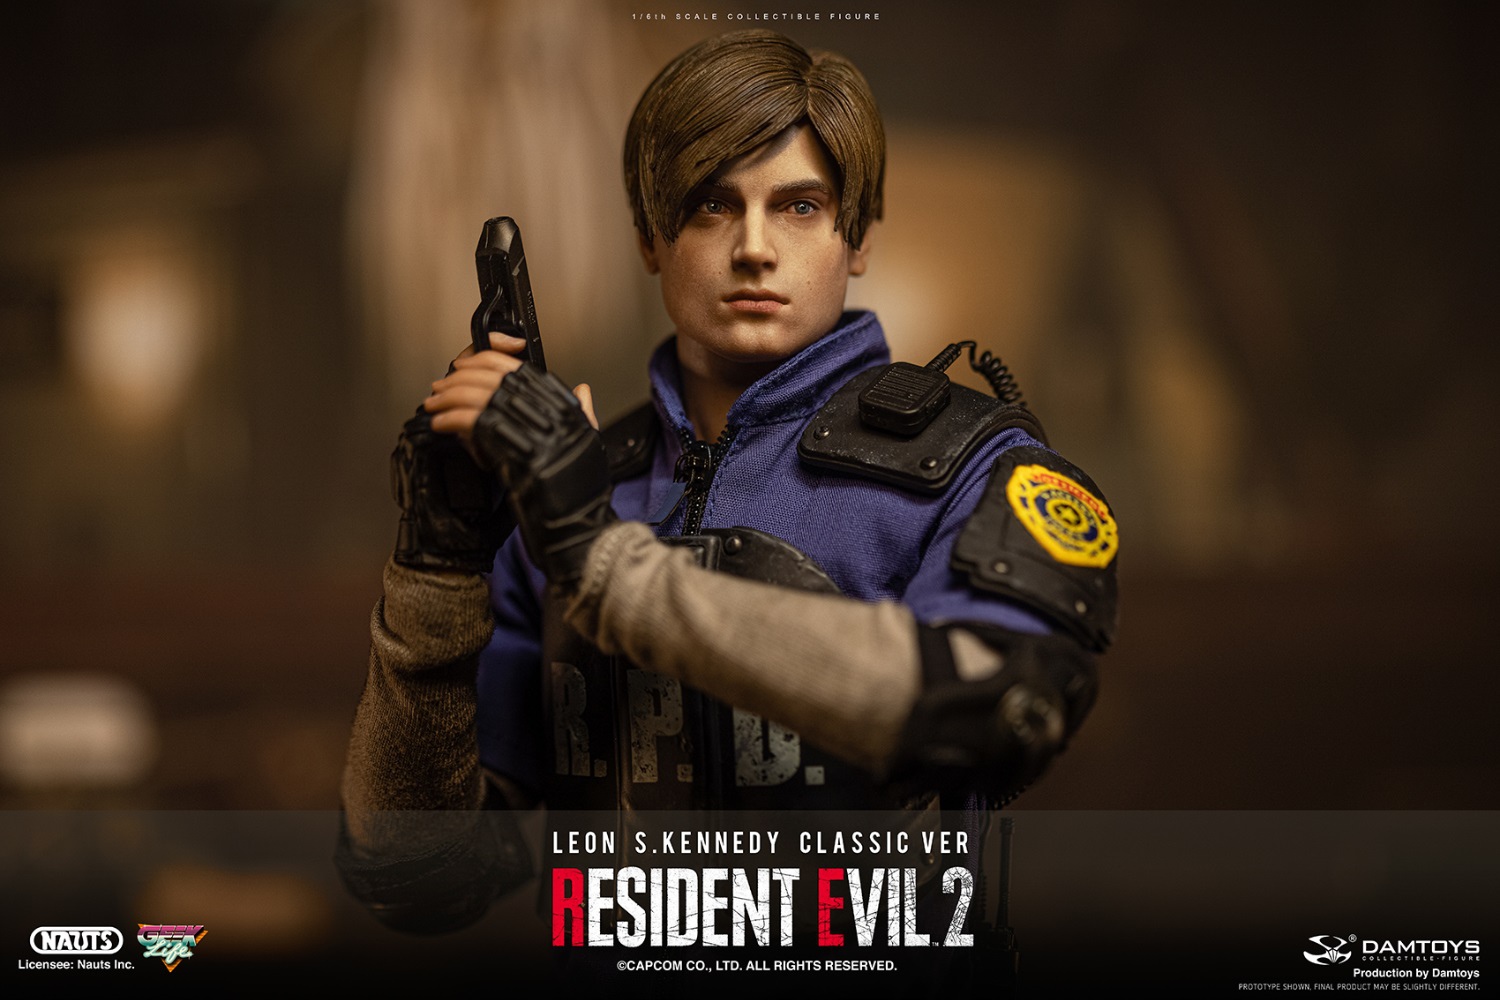 1/6 RESIDENT EVIL 2: Collectible Action Figure Claire Redfield Classic Ver.